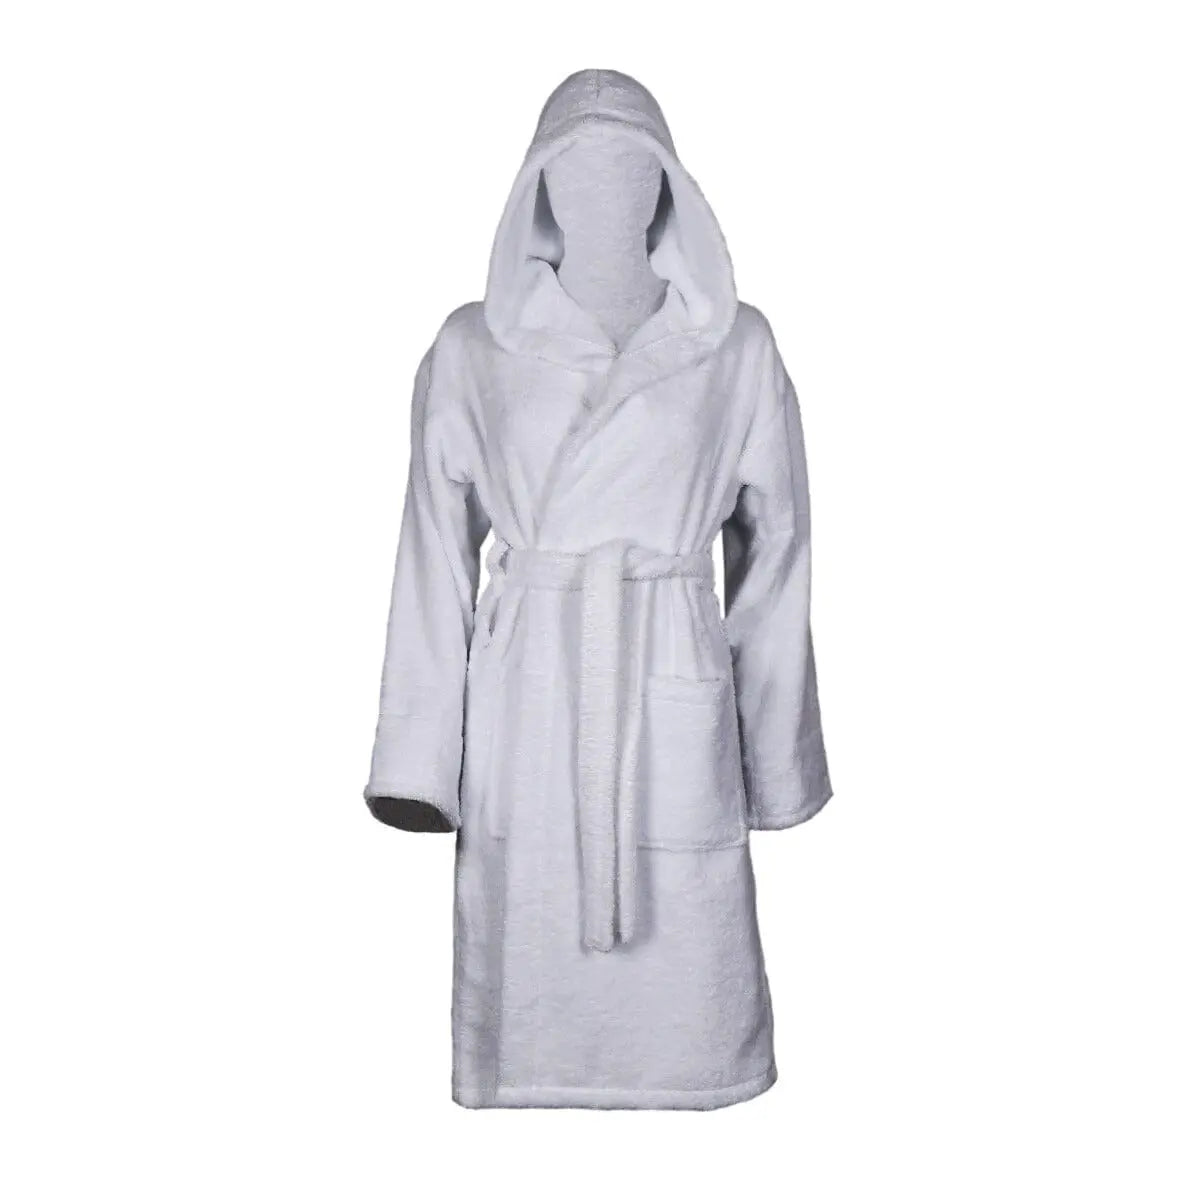 Personalised Egyptian Cotton Hooded Bathrobe - Front and Back Embroidery - Duncan Stewart 1978 Egyptian-White-L-XL Duncan Stewart 1978